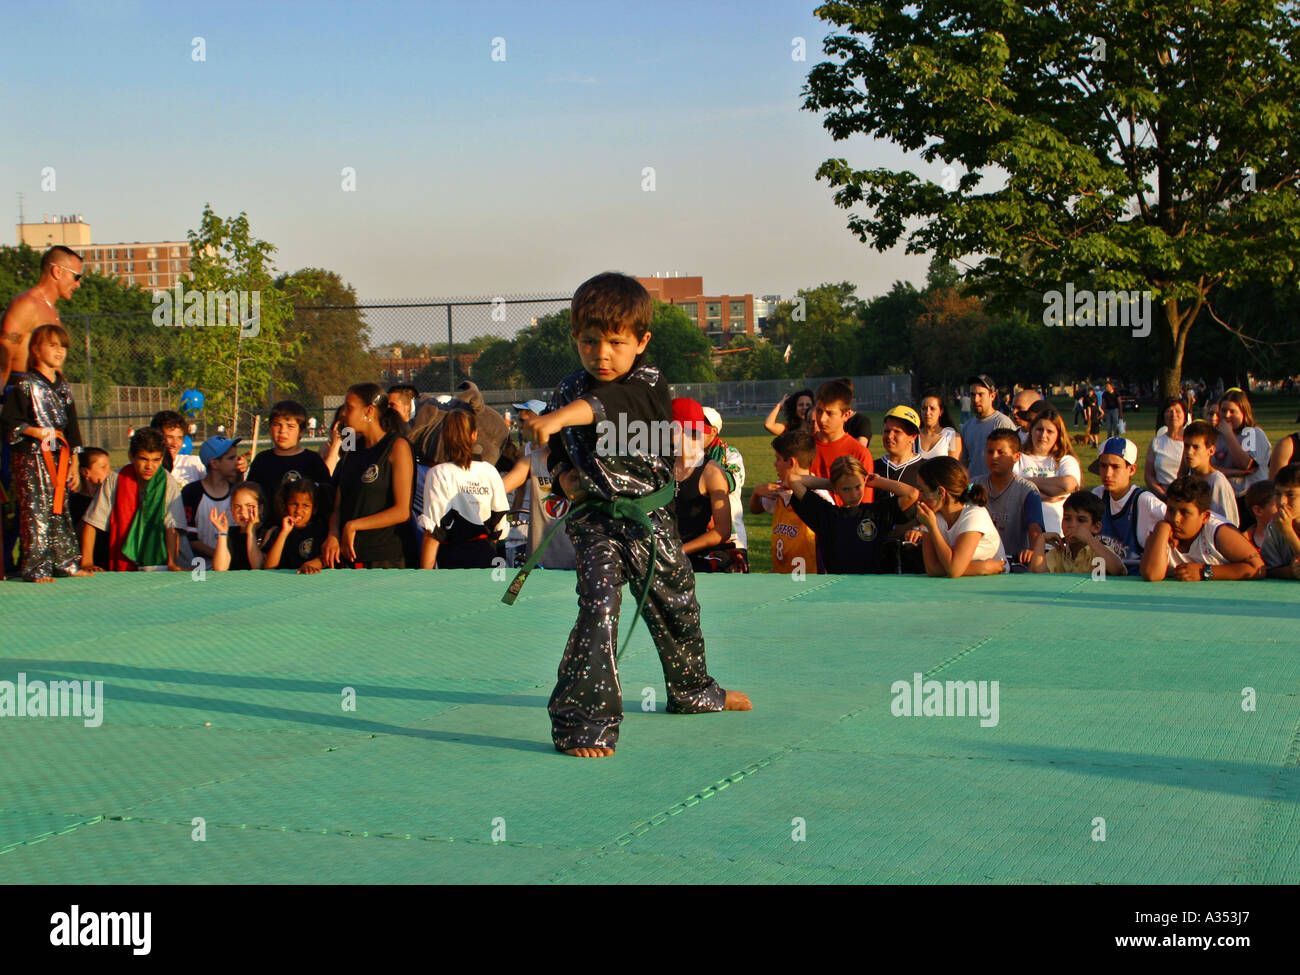 Young boy demonstrating a Karate move on an outdoor stage in the park. Teenage audience observing. Toronto, Ontario, Canada Stock Photo